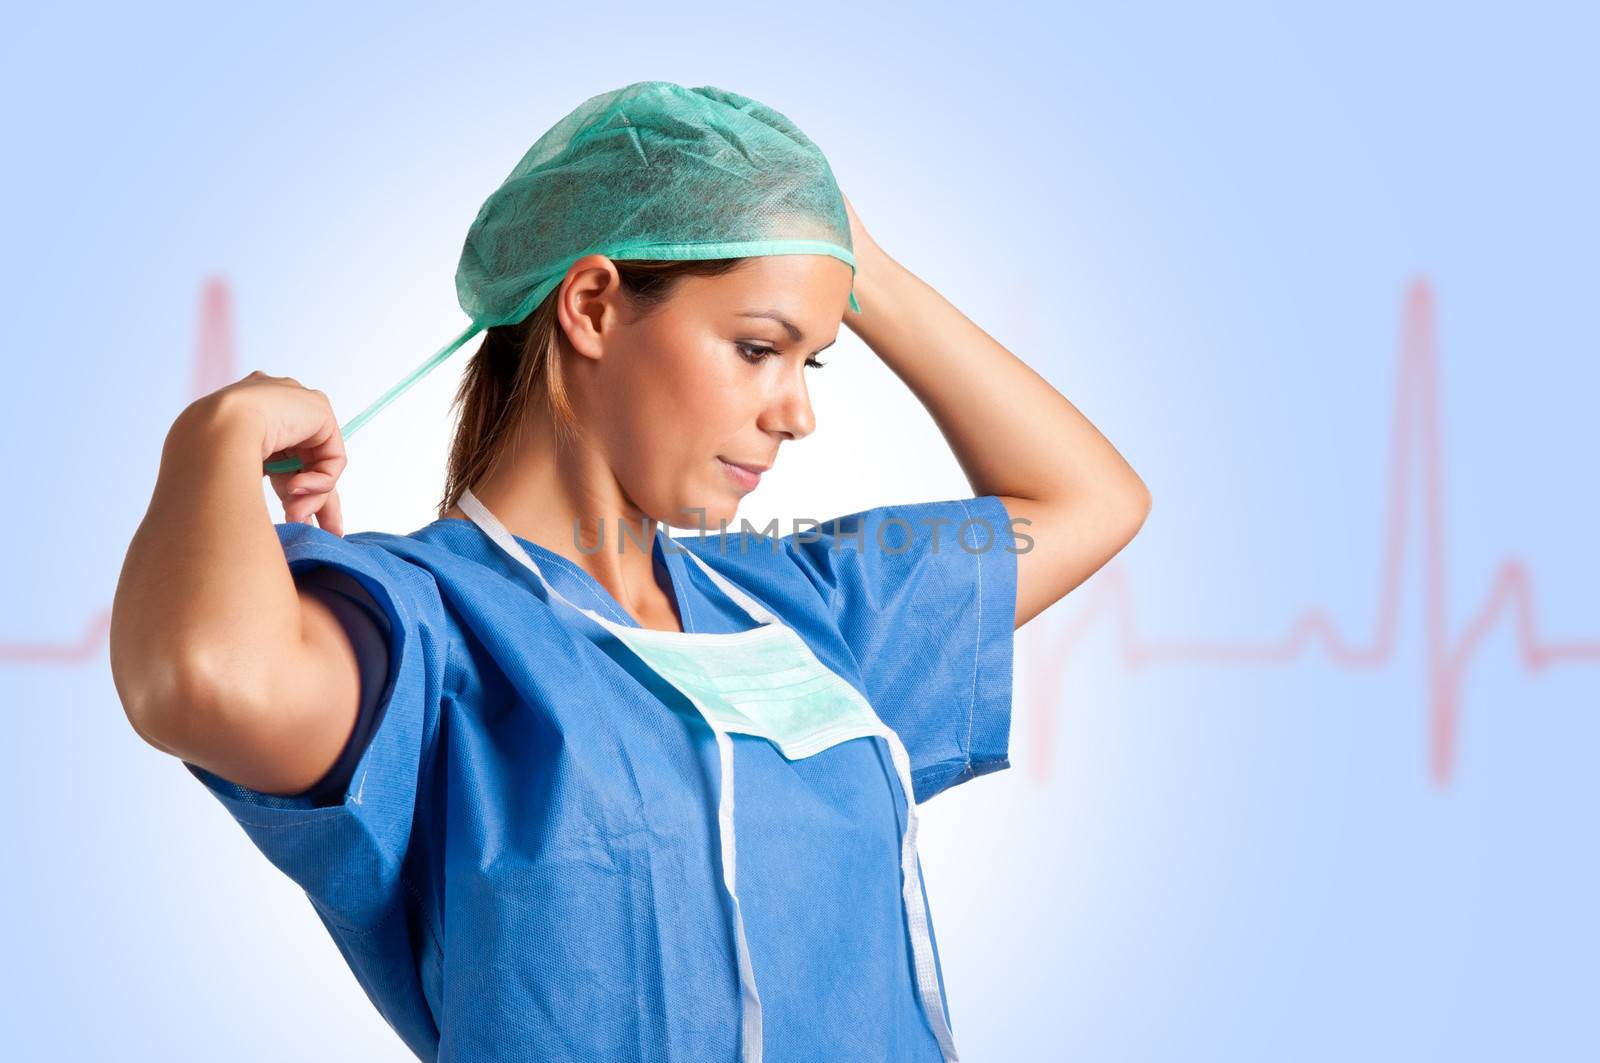 Young female surgeon getting ready for a surgery, with an EKG graph behind her